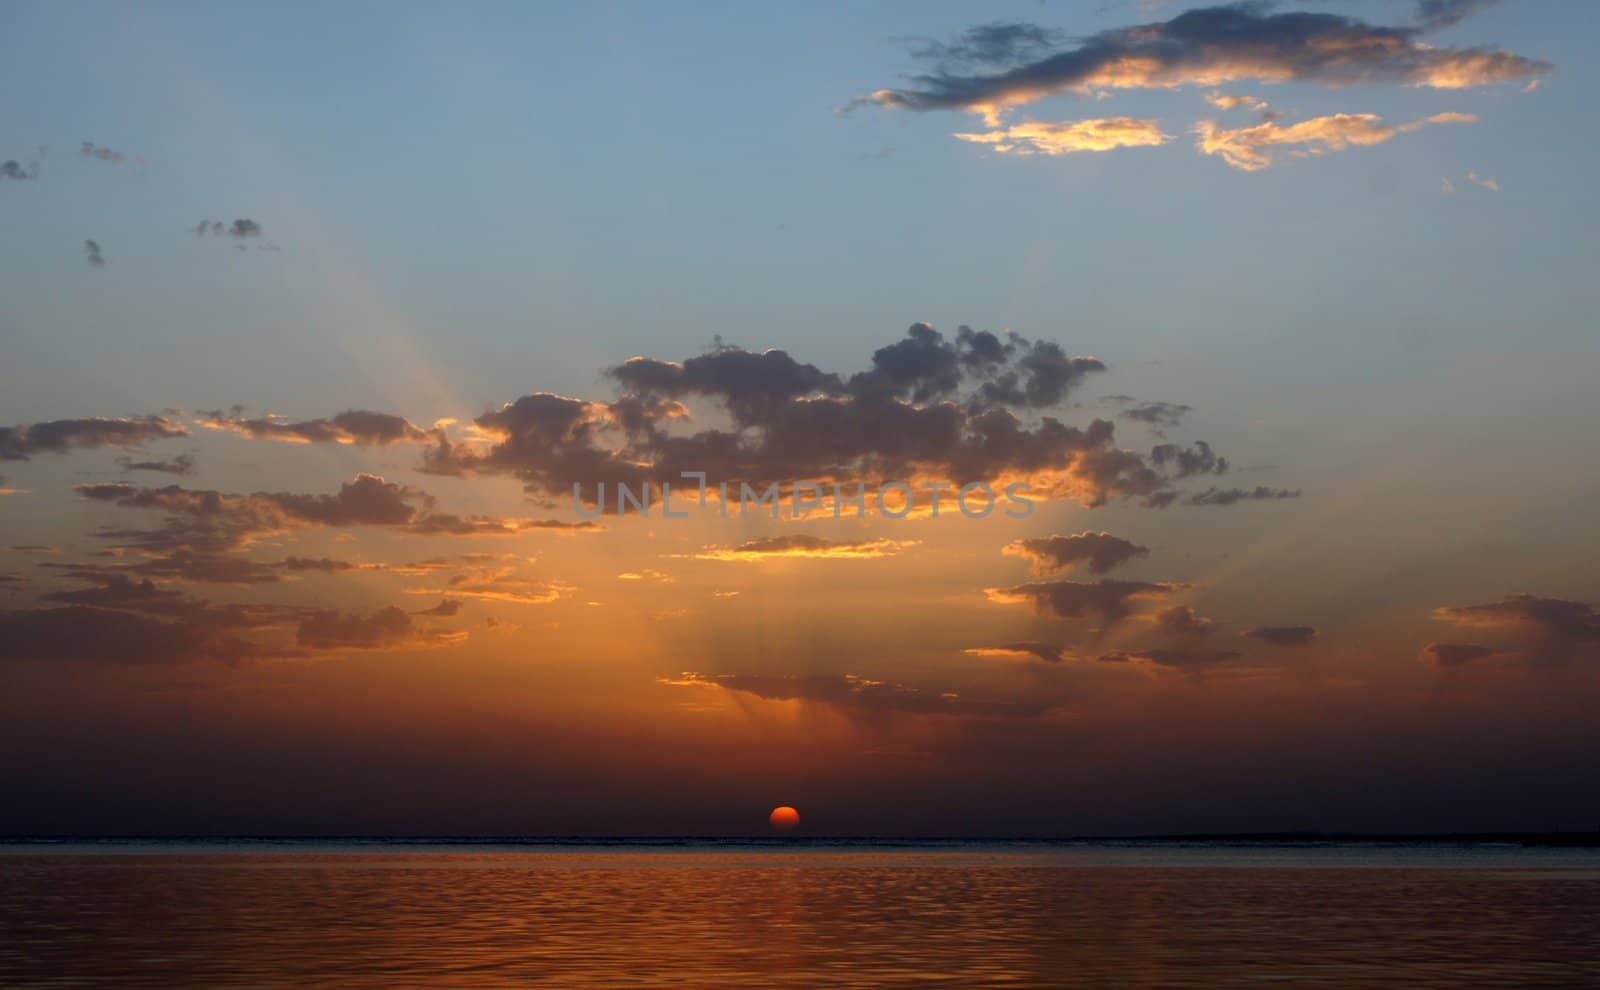 Sunrising over the Red sea in Egypt by Elet